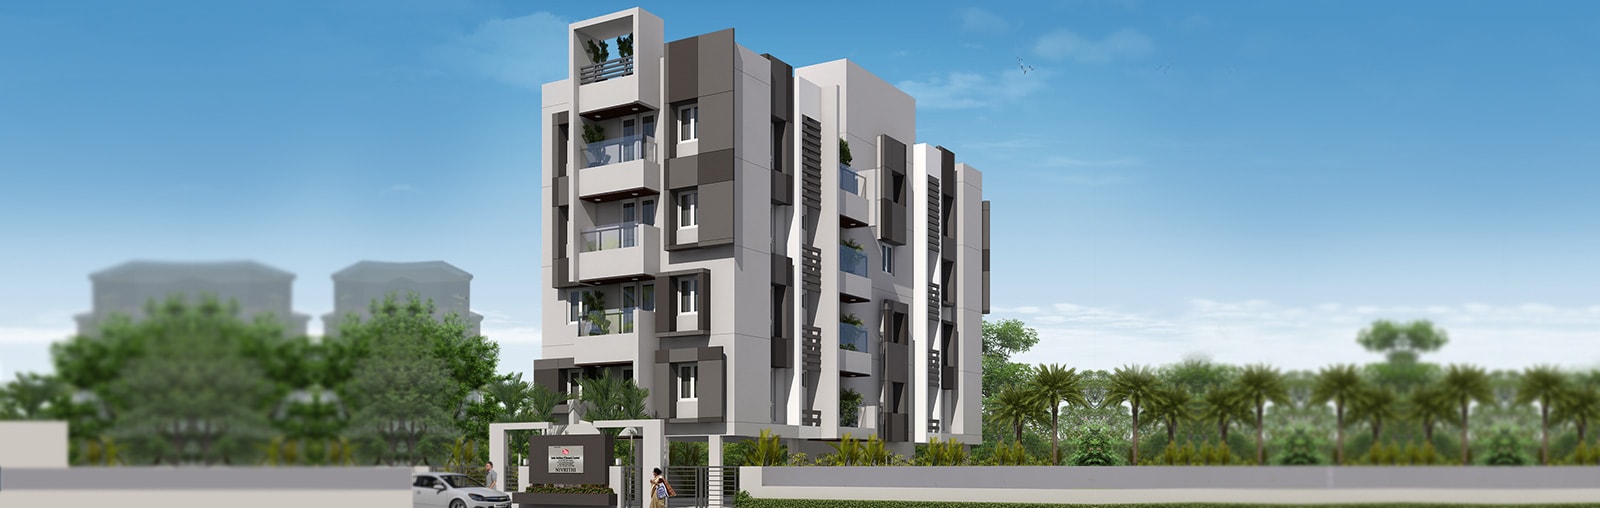 Apartments and Flats for Sale in Anna nagar